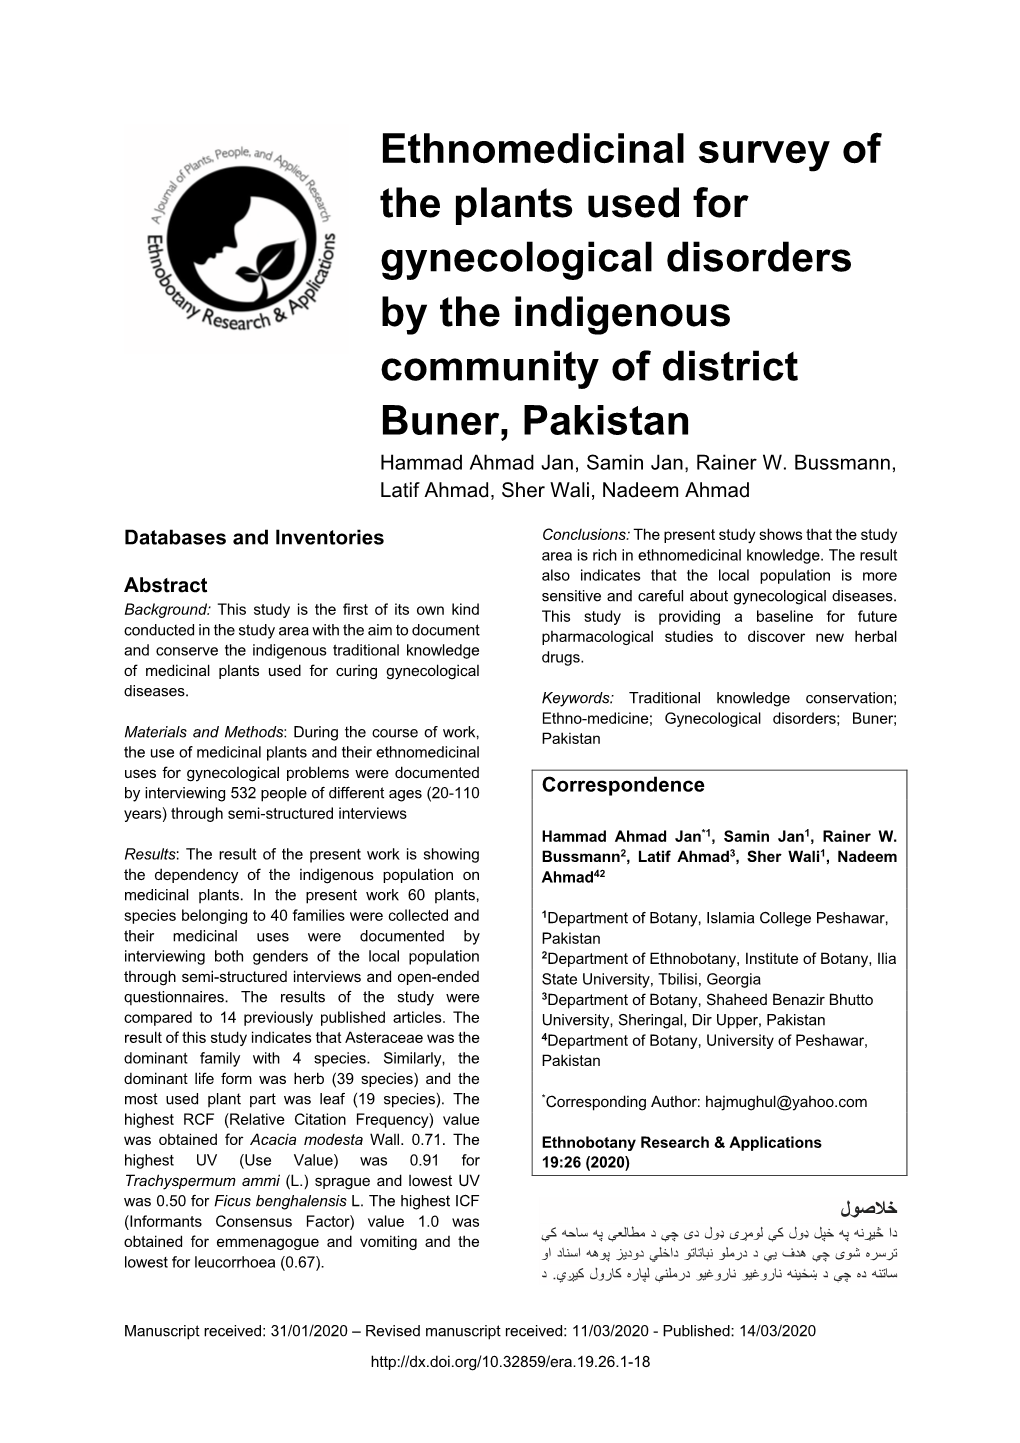 Ethnomedicinal Survey of the Plants Used for Gynecological Disorders by the Indigenous Community of District Buner, Pakistan